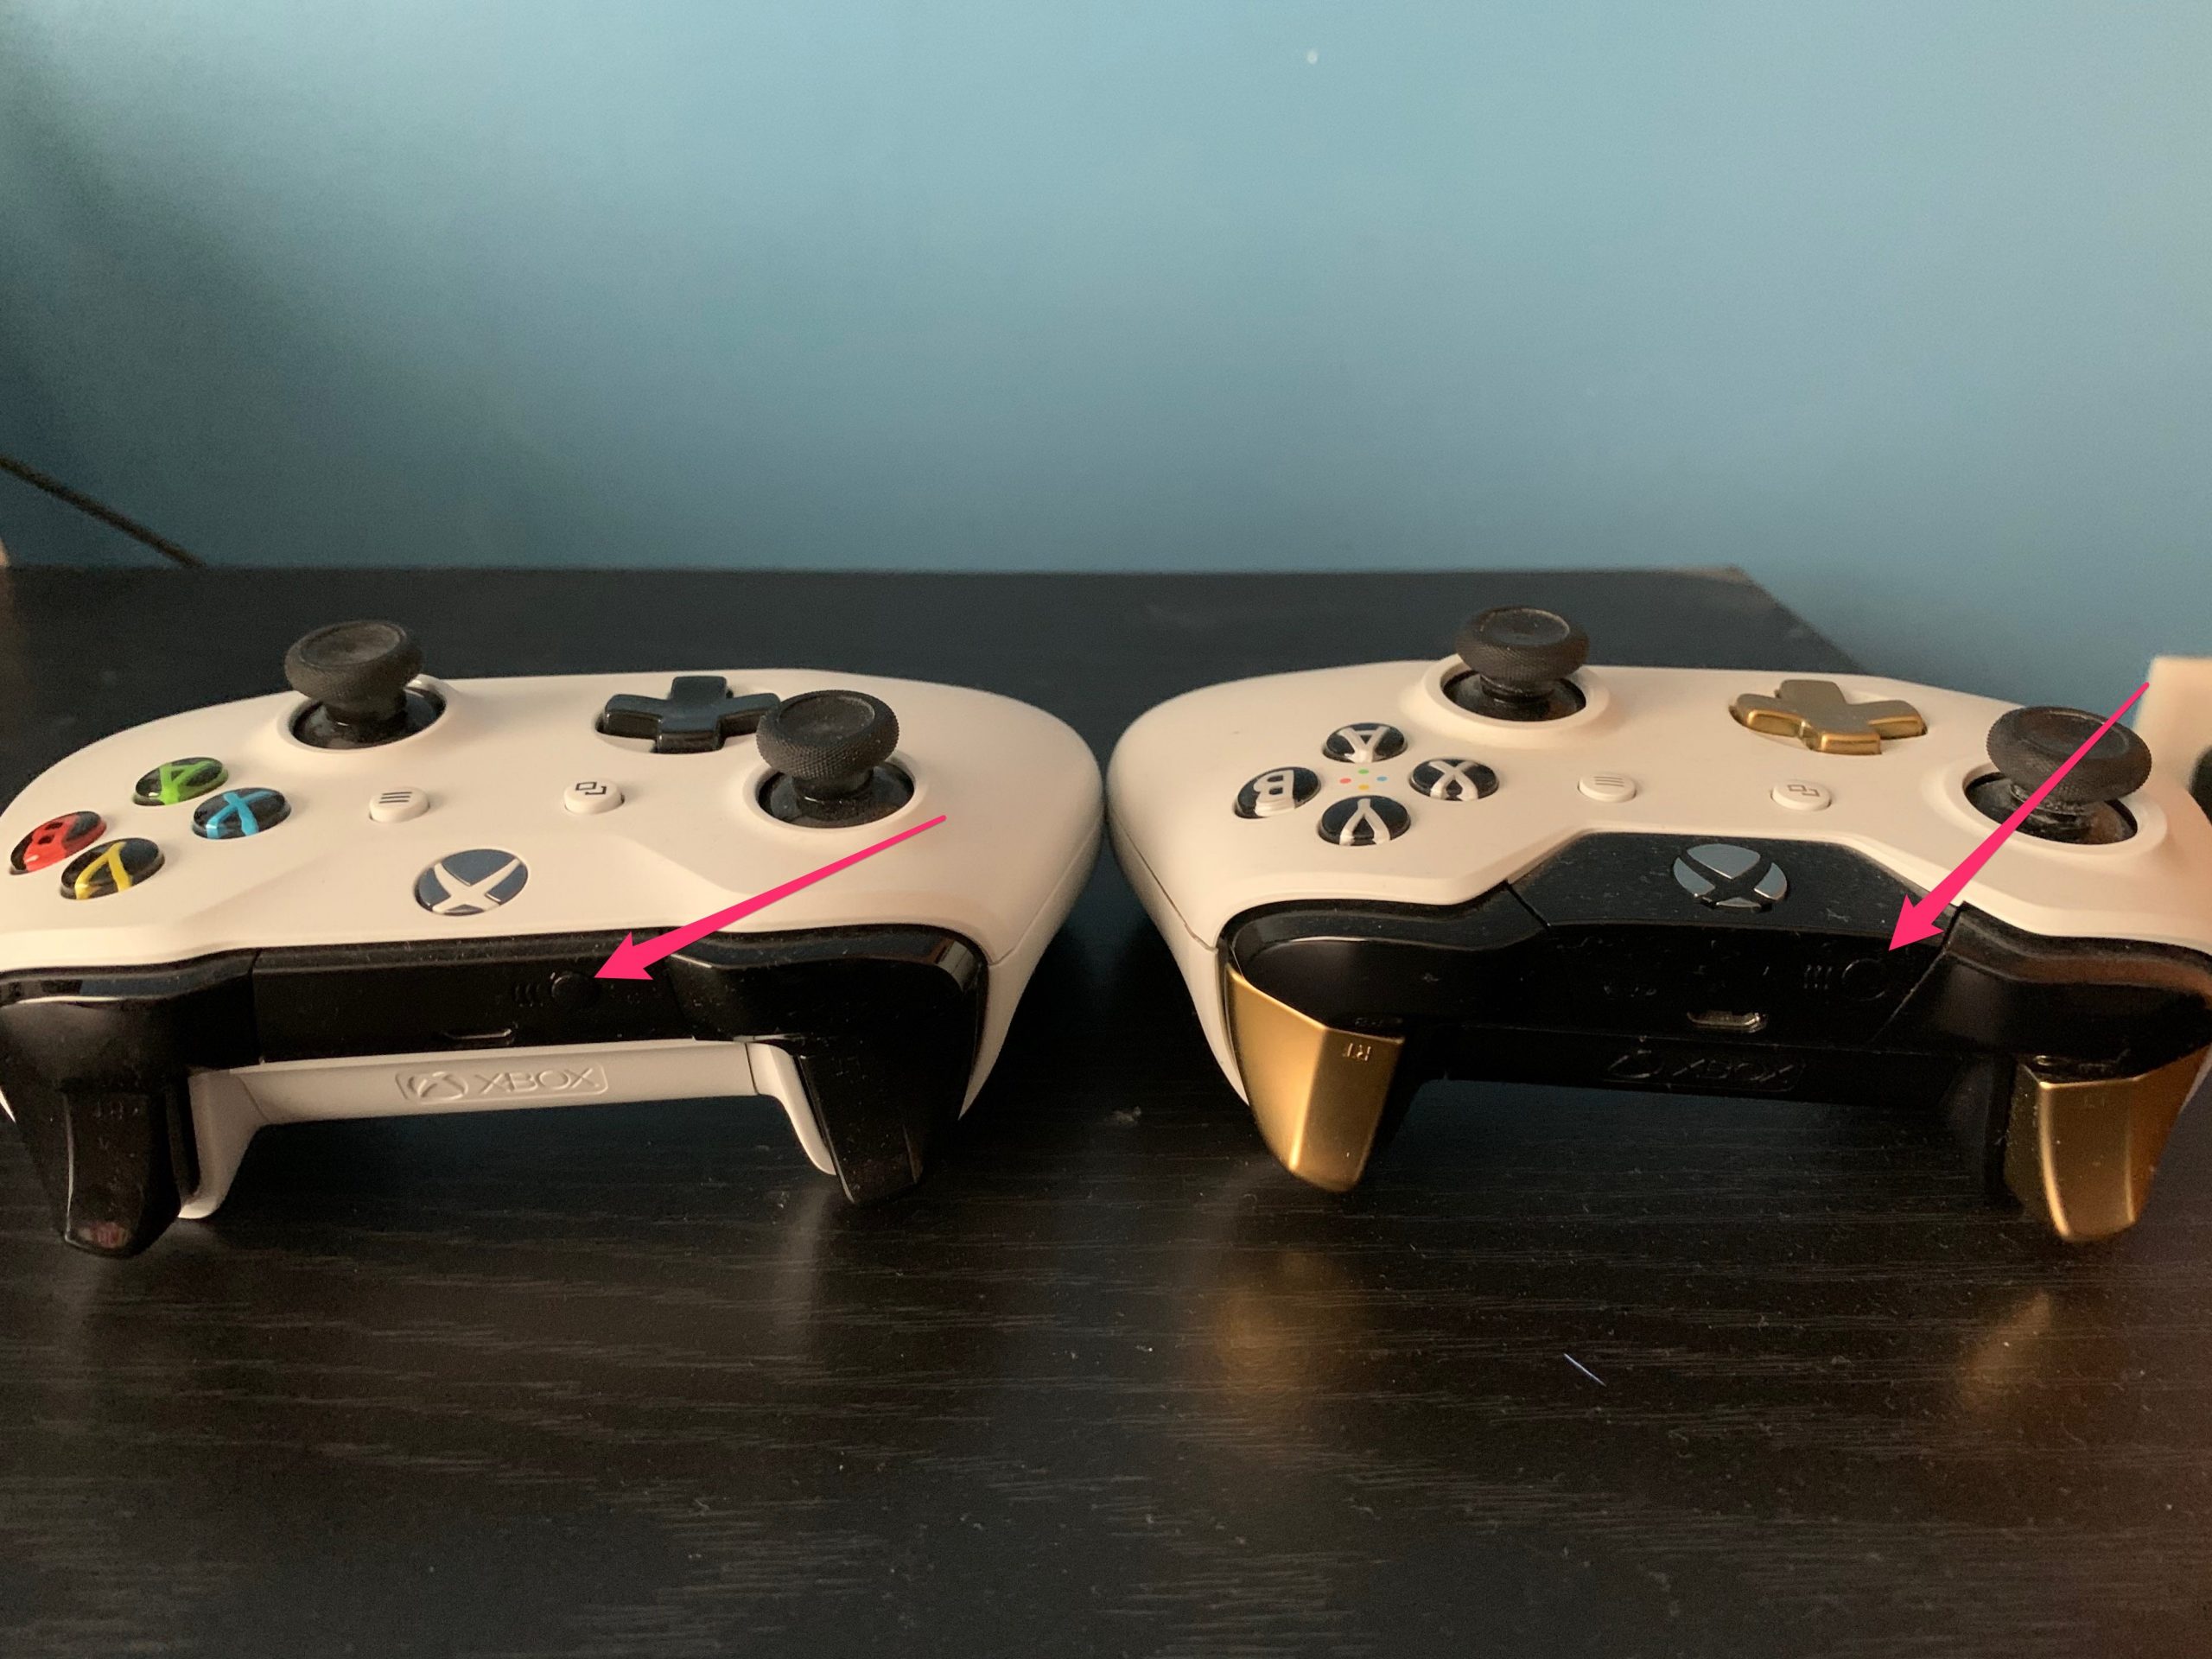 Jane Austen lettelse albue How to connect your Xbox One controller to a PC in 3 different ways